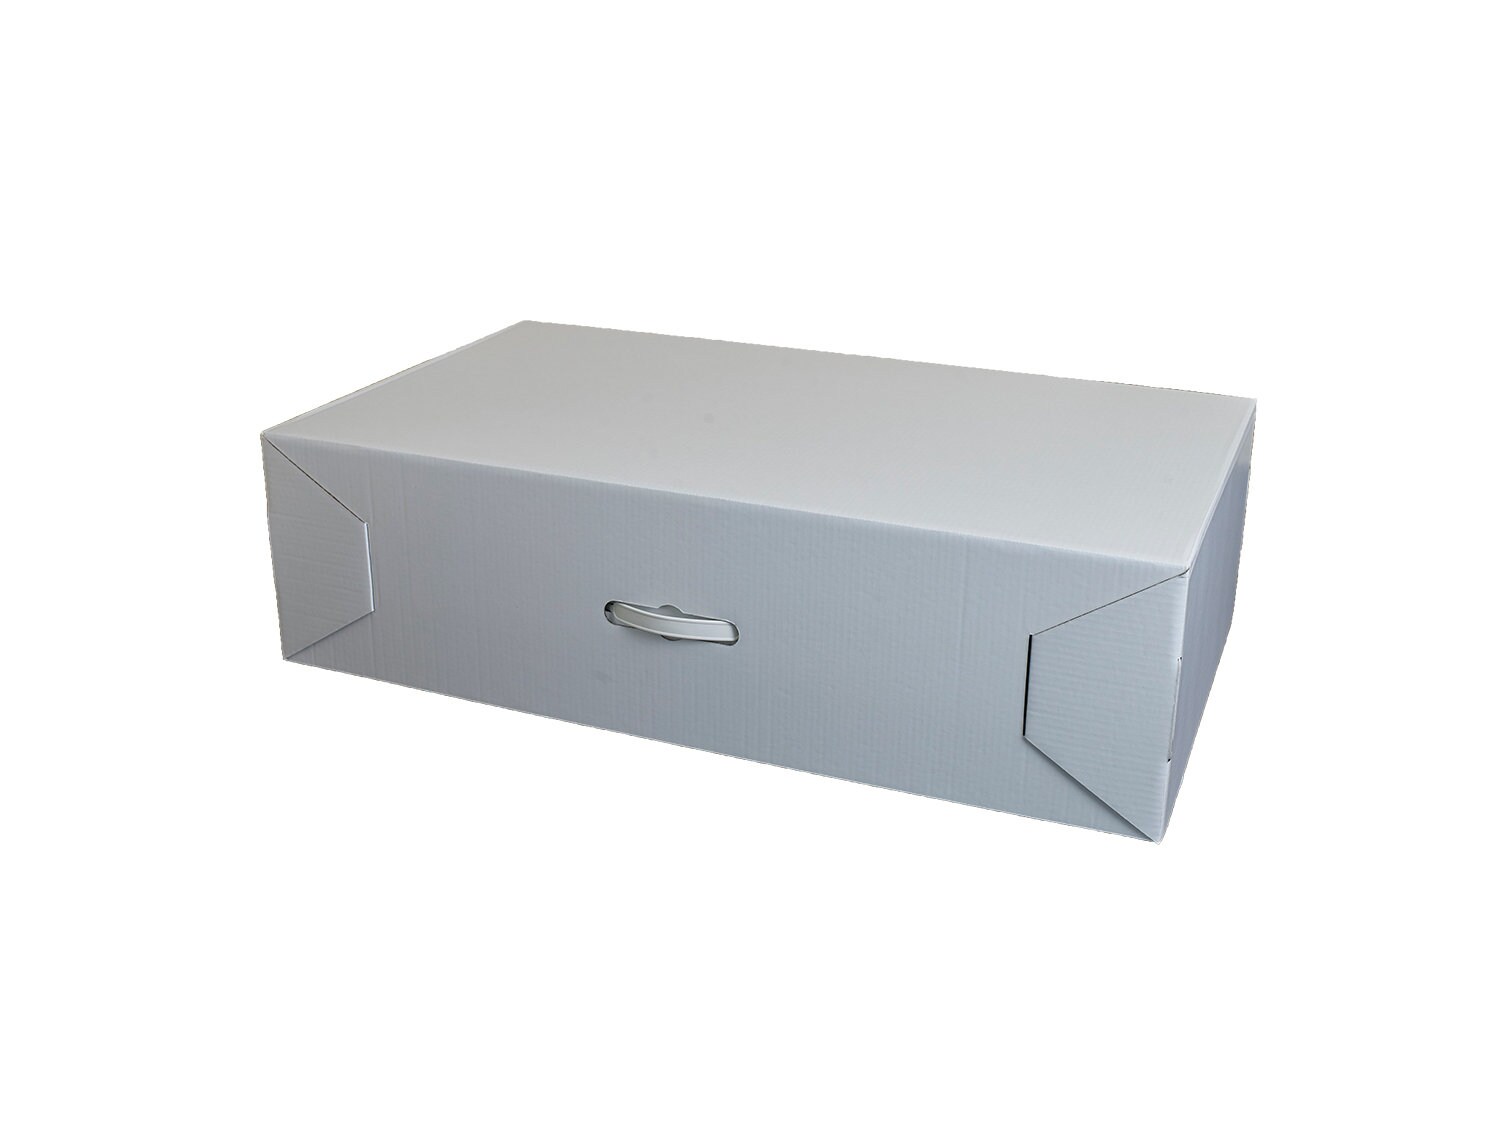 Wedding dress storage Airline Travel box V strong Acid free tissue FREE DELIVERY 